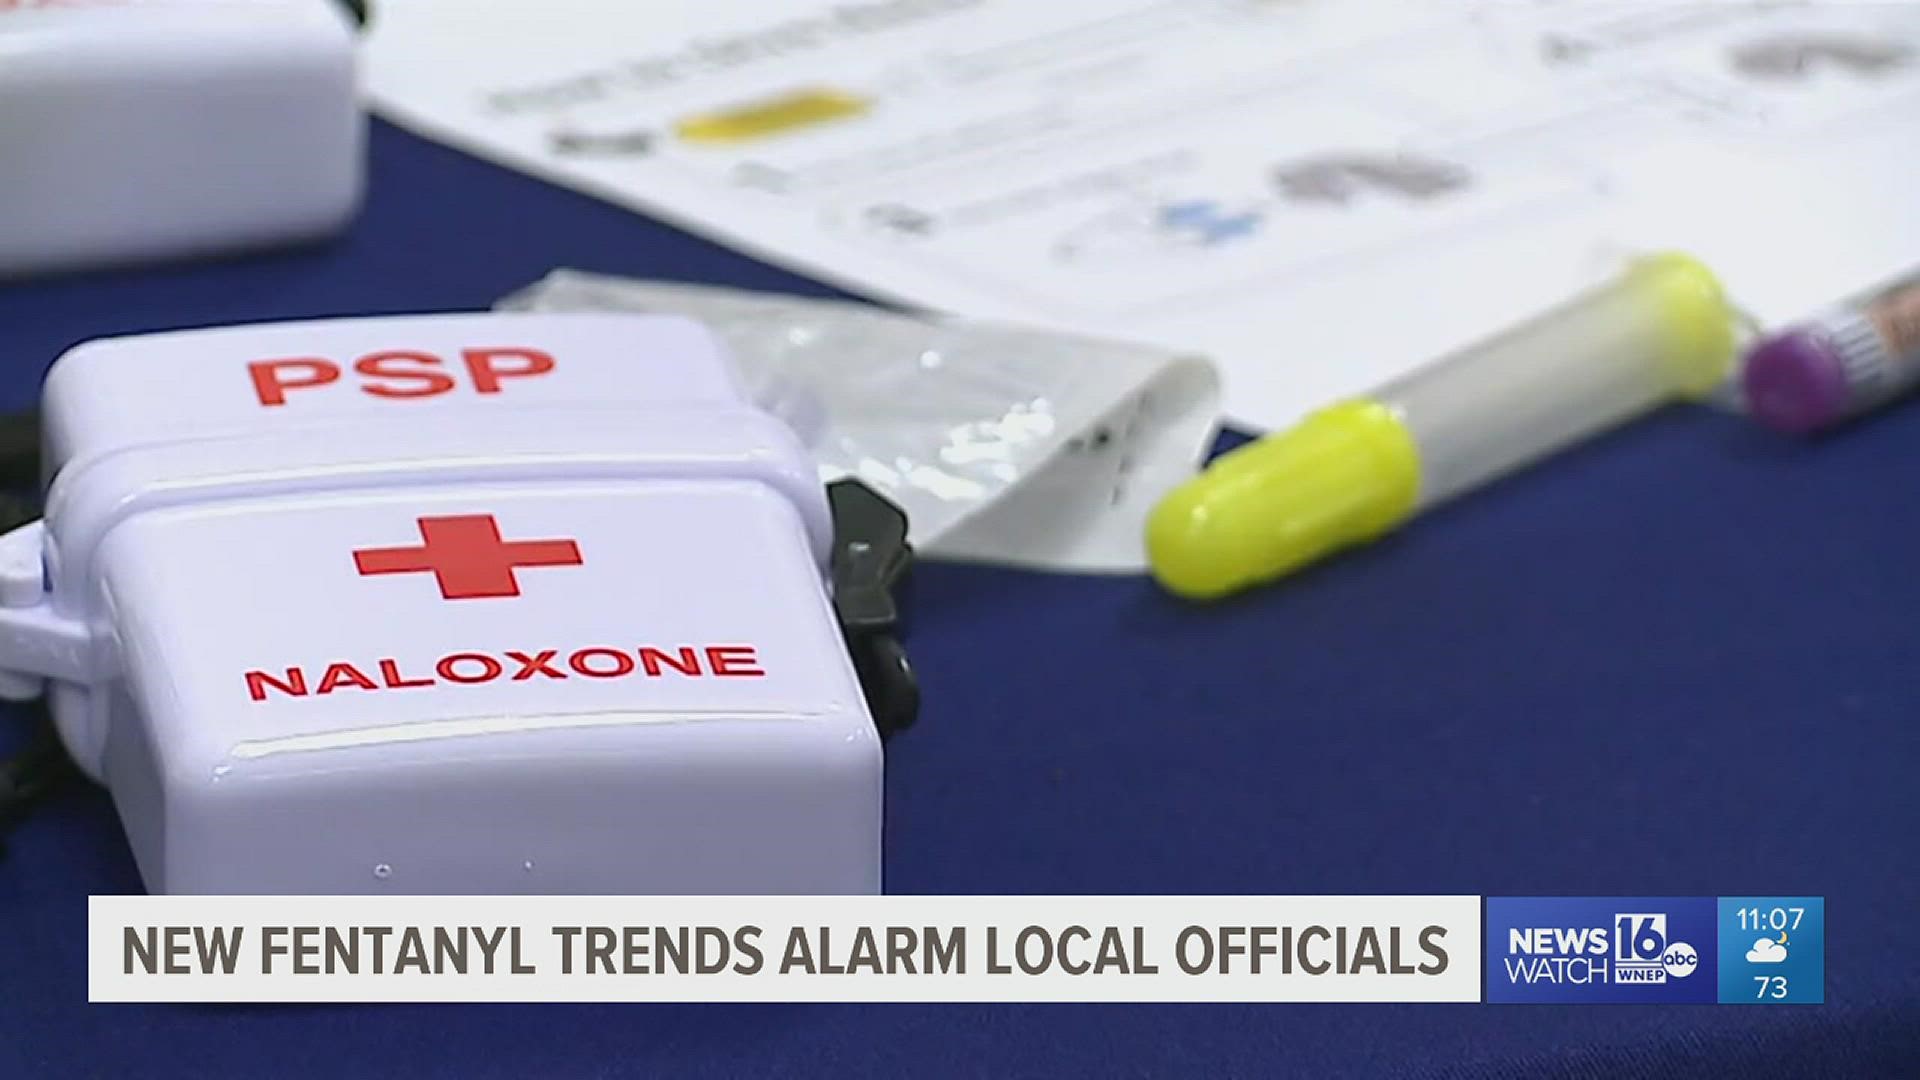 The city of Scranton is moving to become the third city in Pennsylvania to decriminalize fentanyl test strips in an effort to combat the opioid crisis.